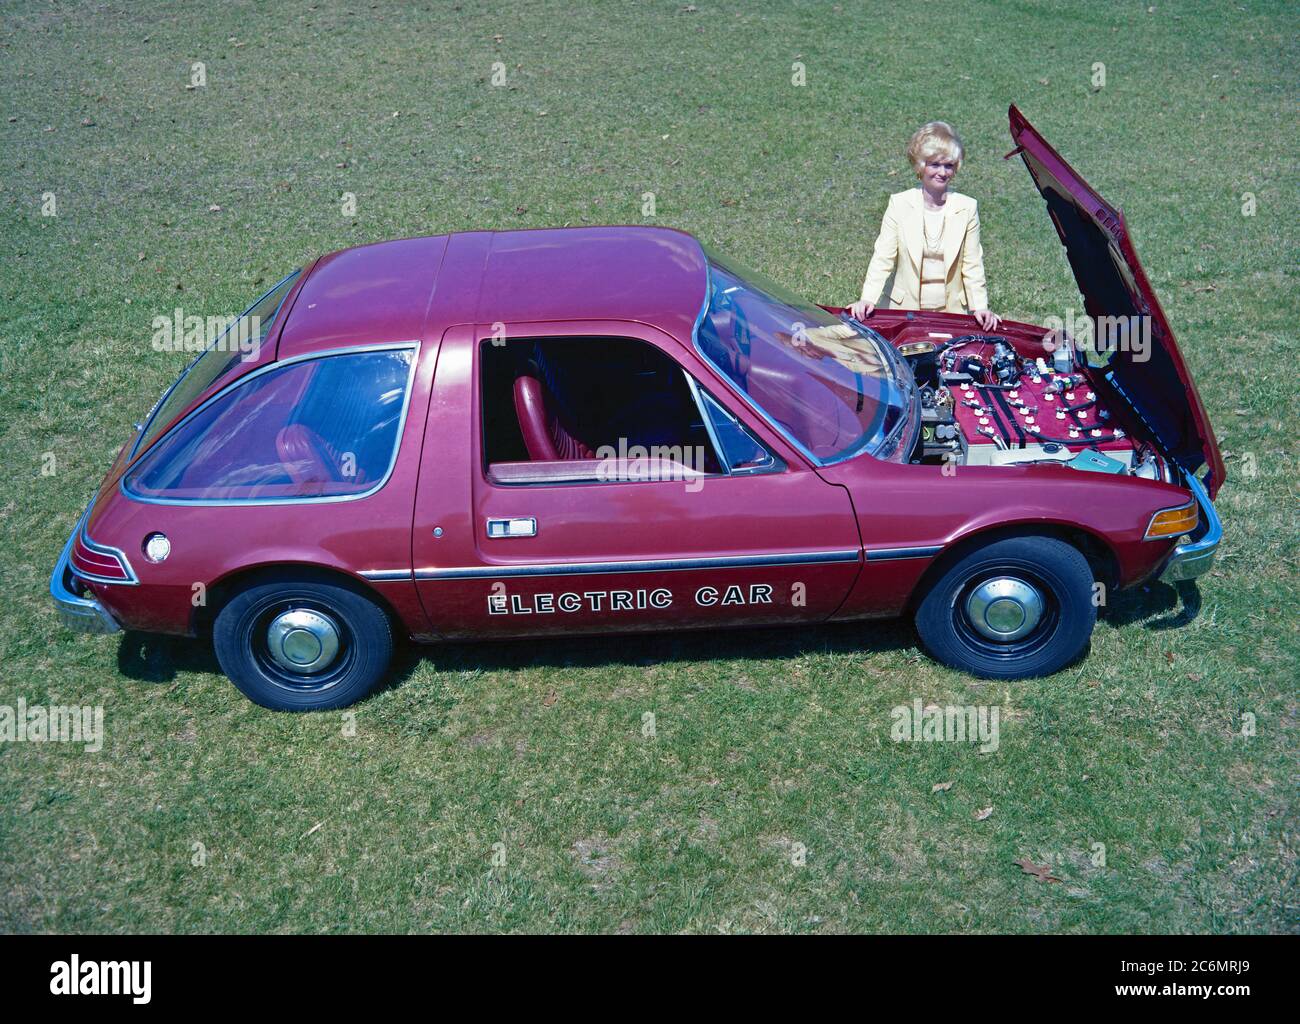 1977 Electric Pacer Automobile Stock Photo